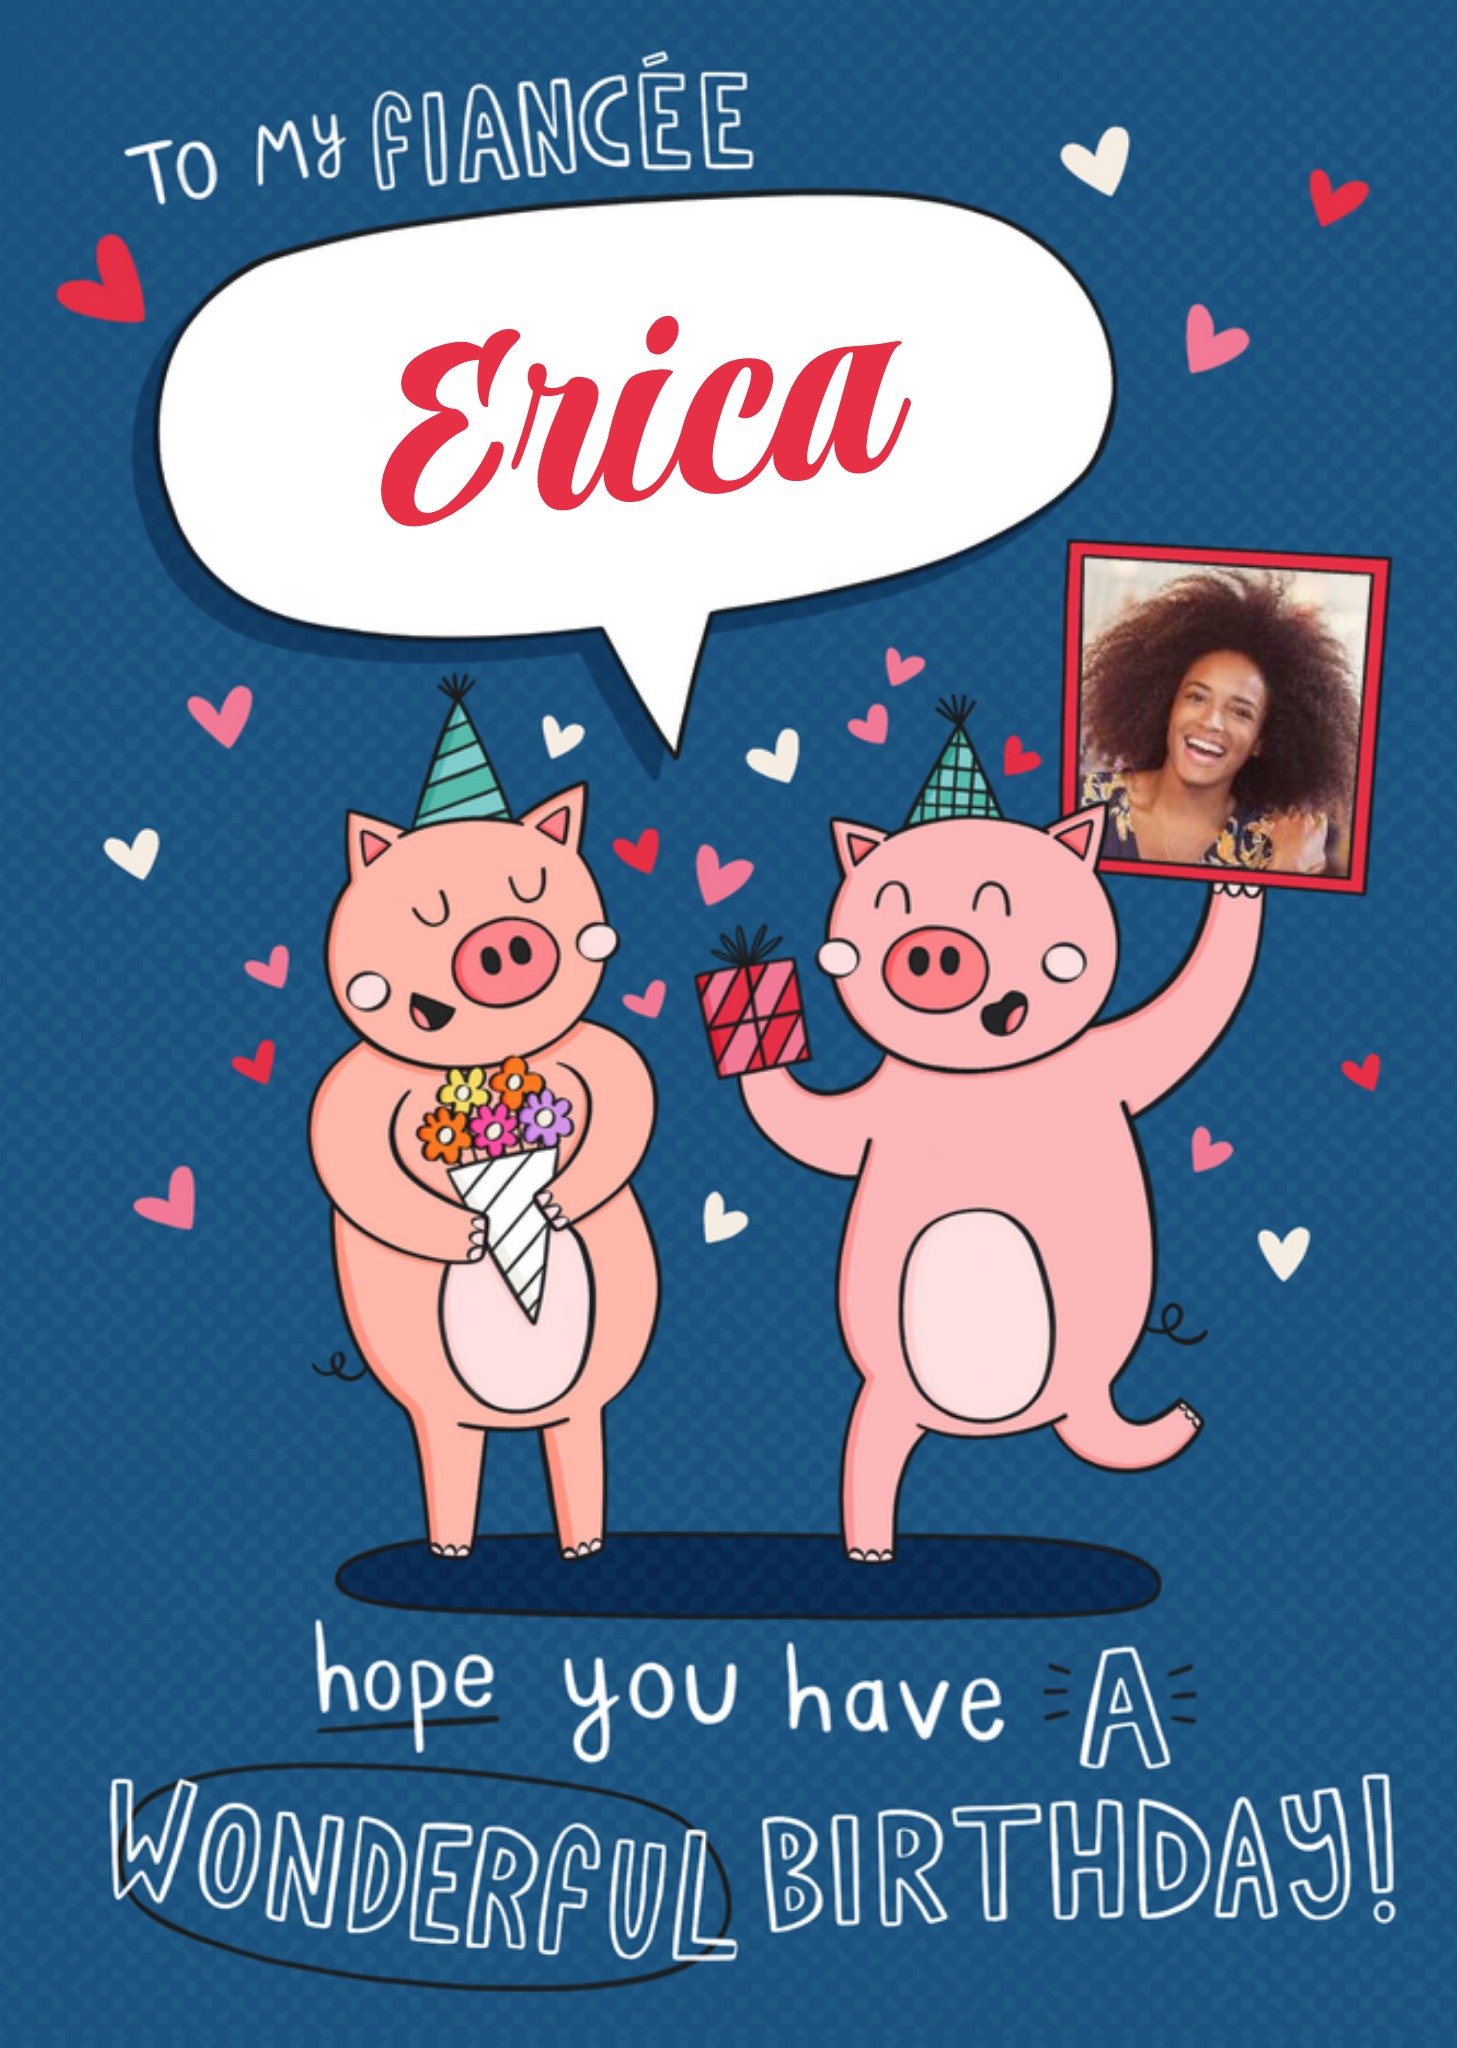 Moonpig Fun Illustration Of A Pig Gifting Presents To The Other Fiancee's Photo Upload Birthday Card